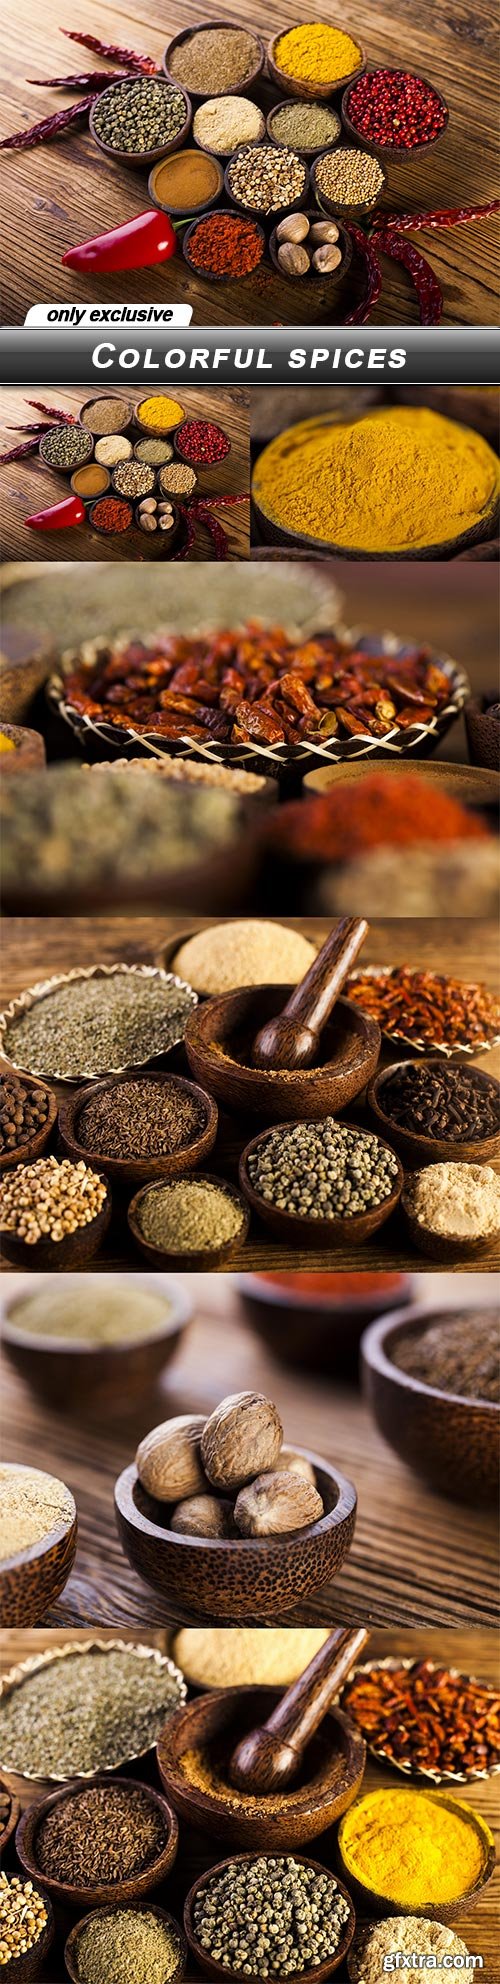 Colorful spices - 10 UHQ JPEG